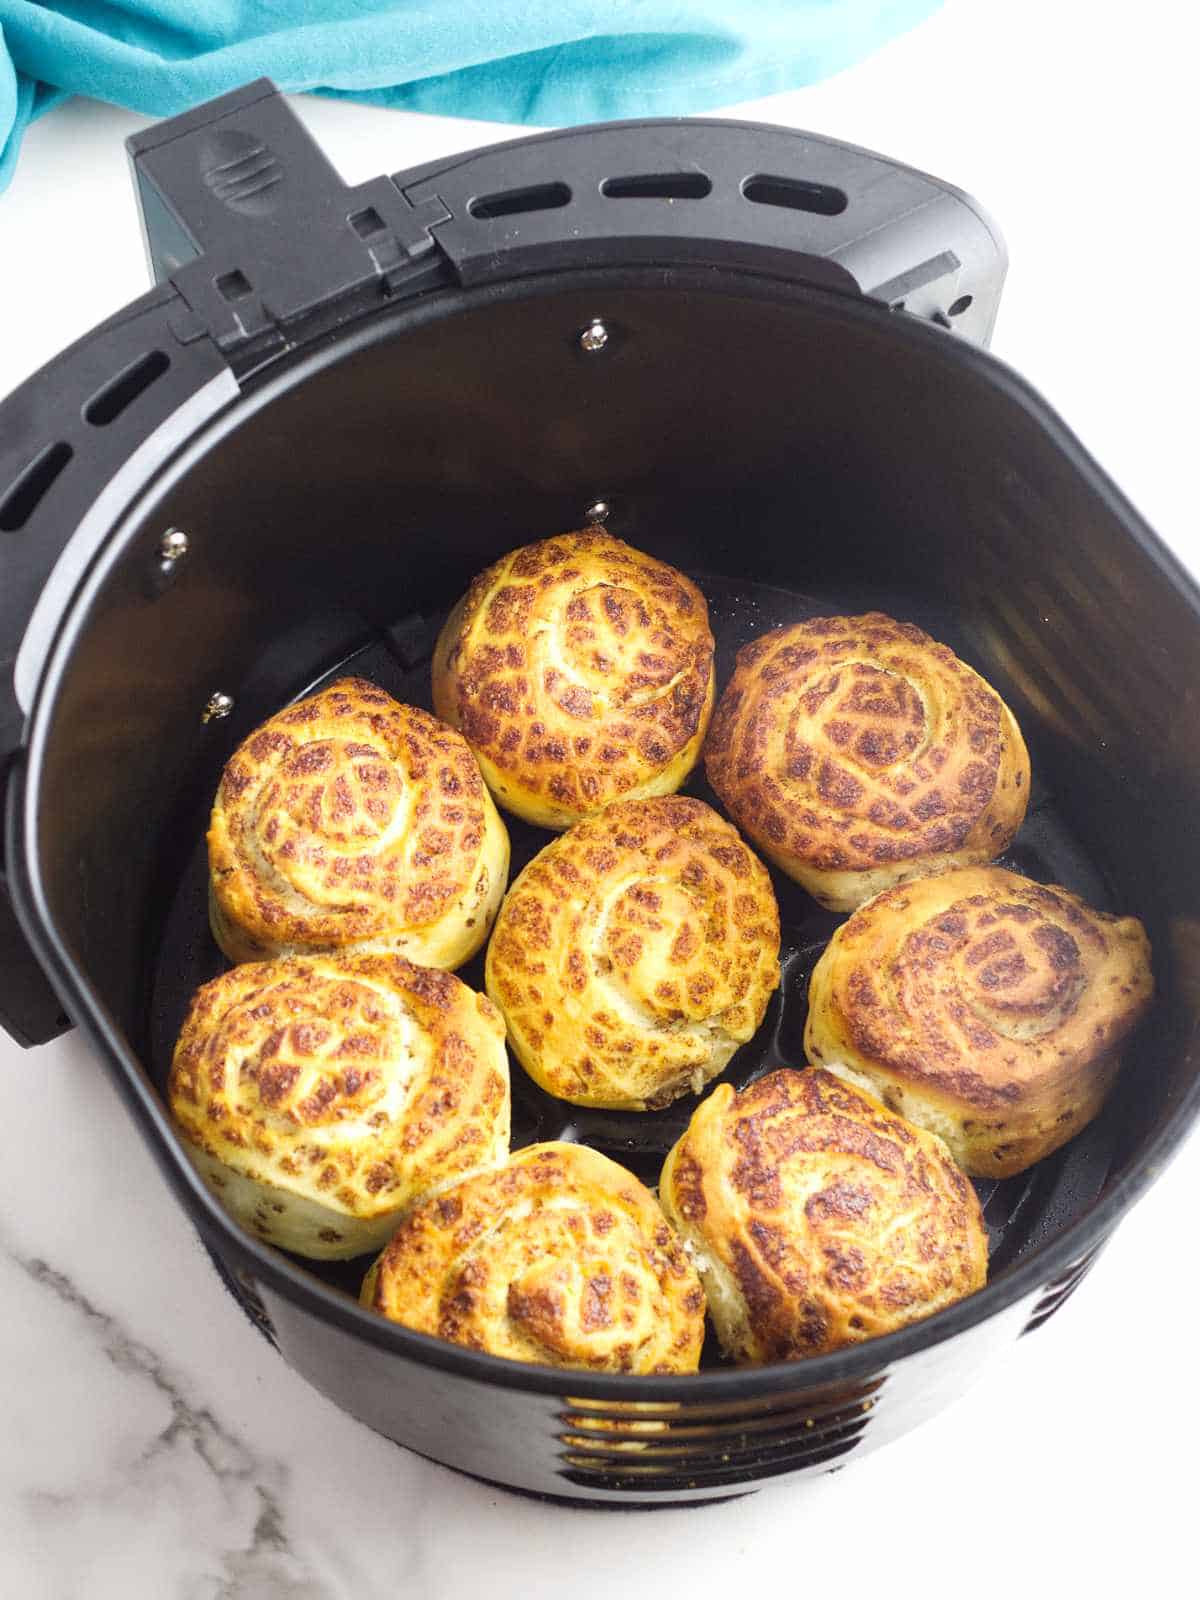 baked pastries. in an air fryer.